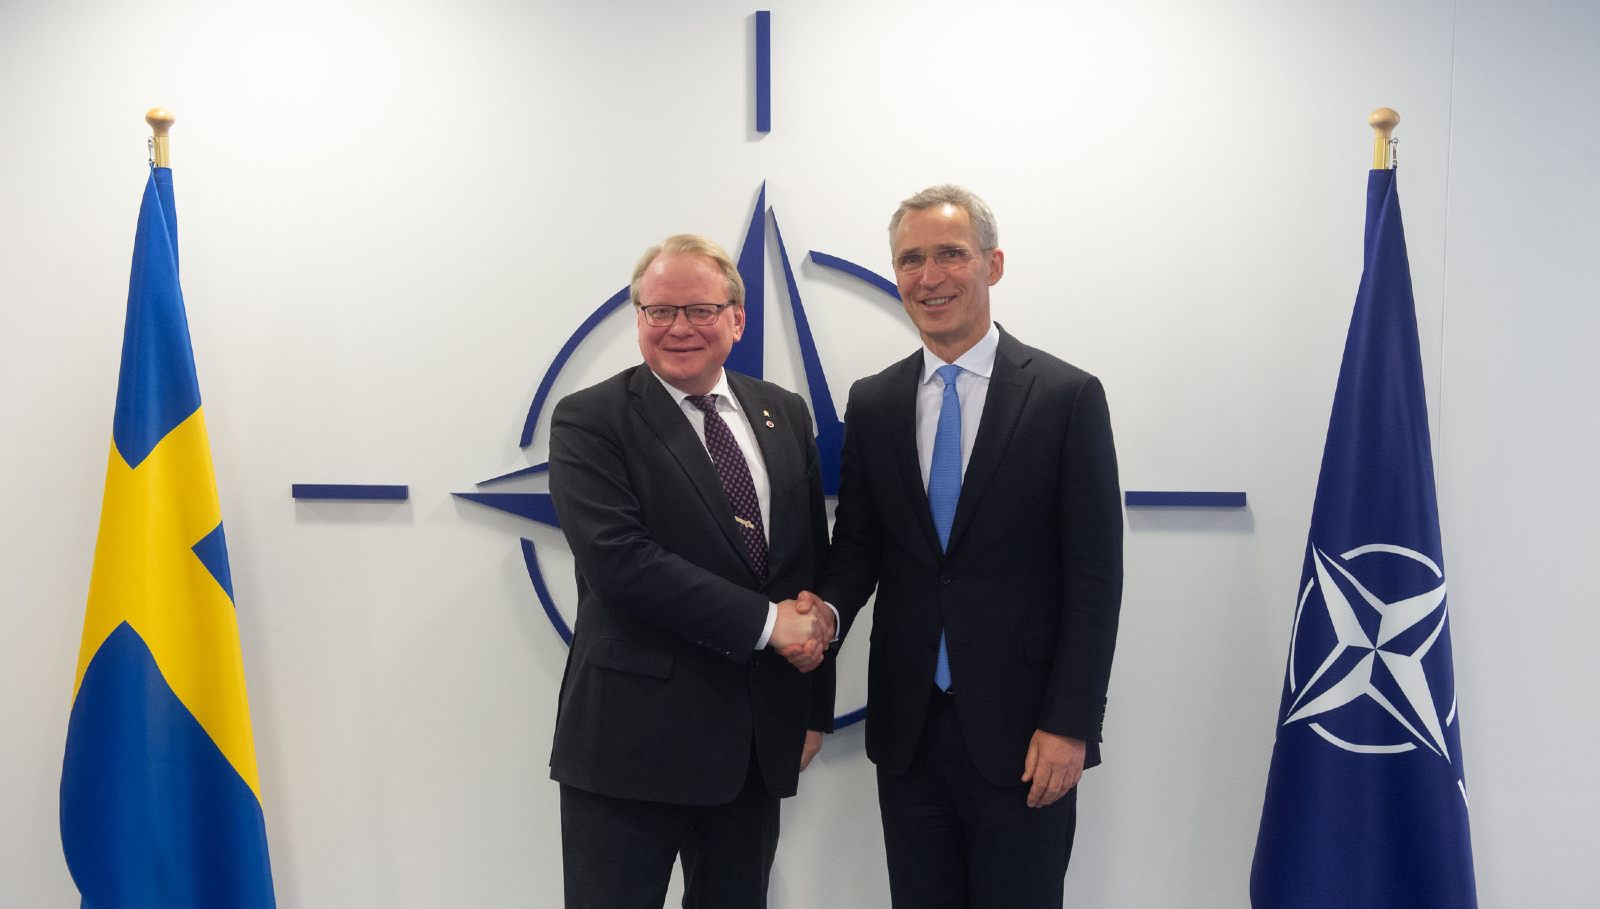 As a key NATO partner, Sweden’s increased defense spending, and its “Total Defense” concept, will significantly enhance security in the critical Baltic Sea region.